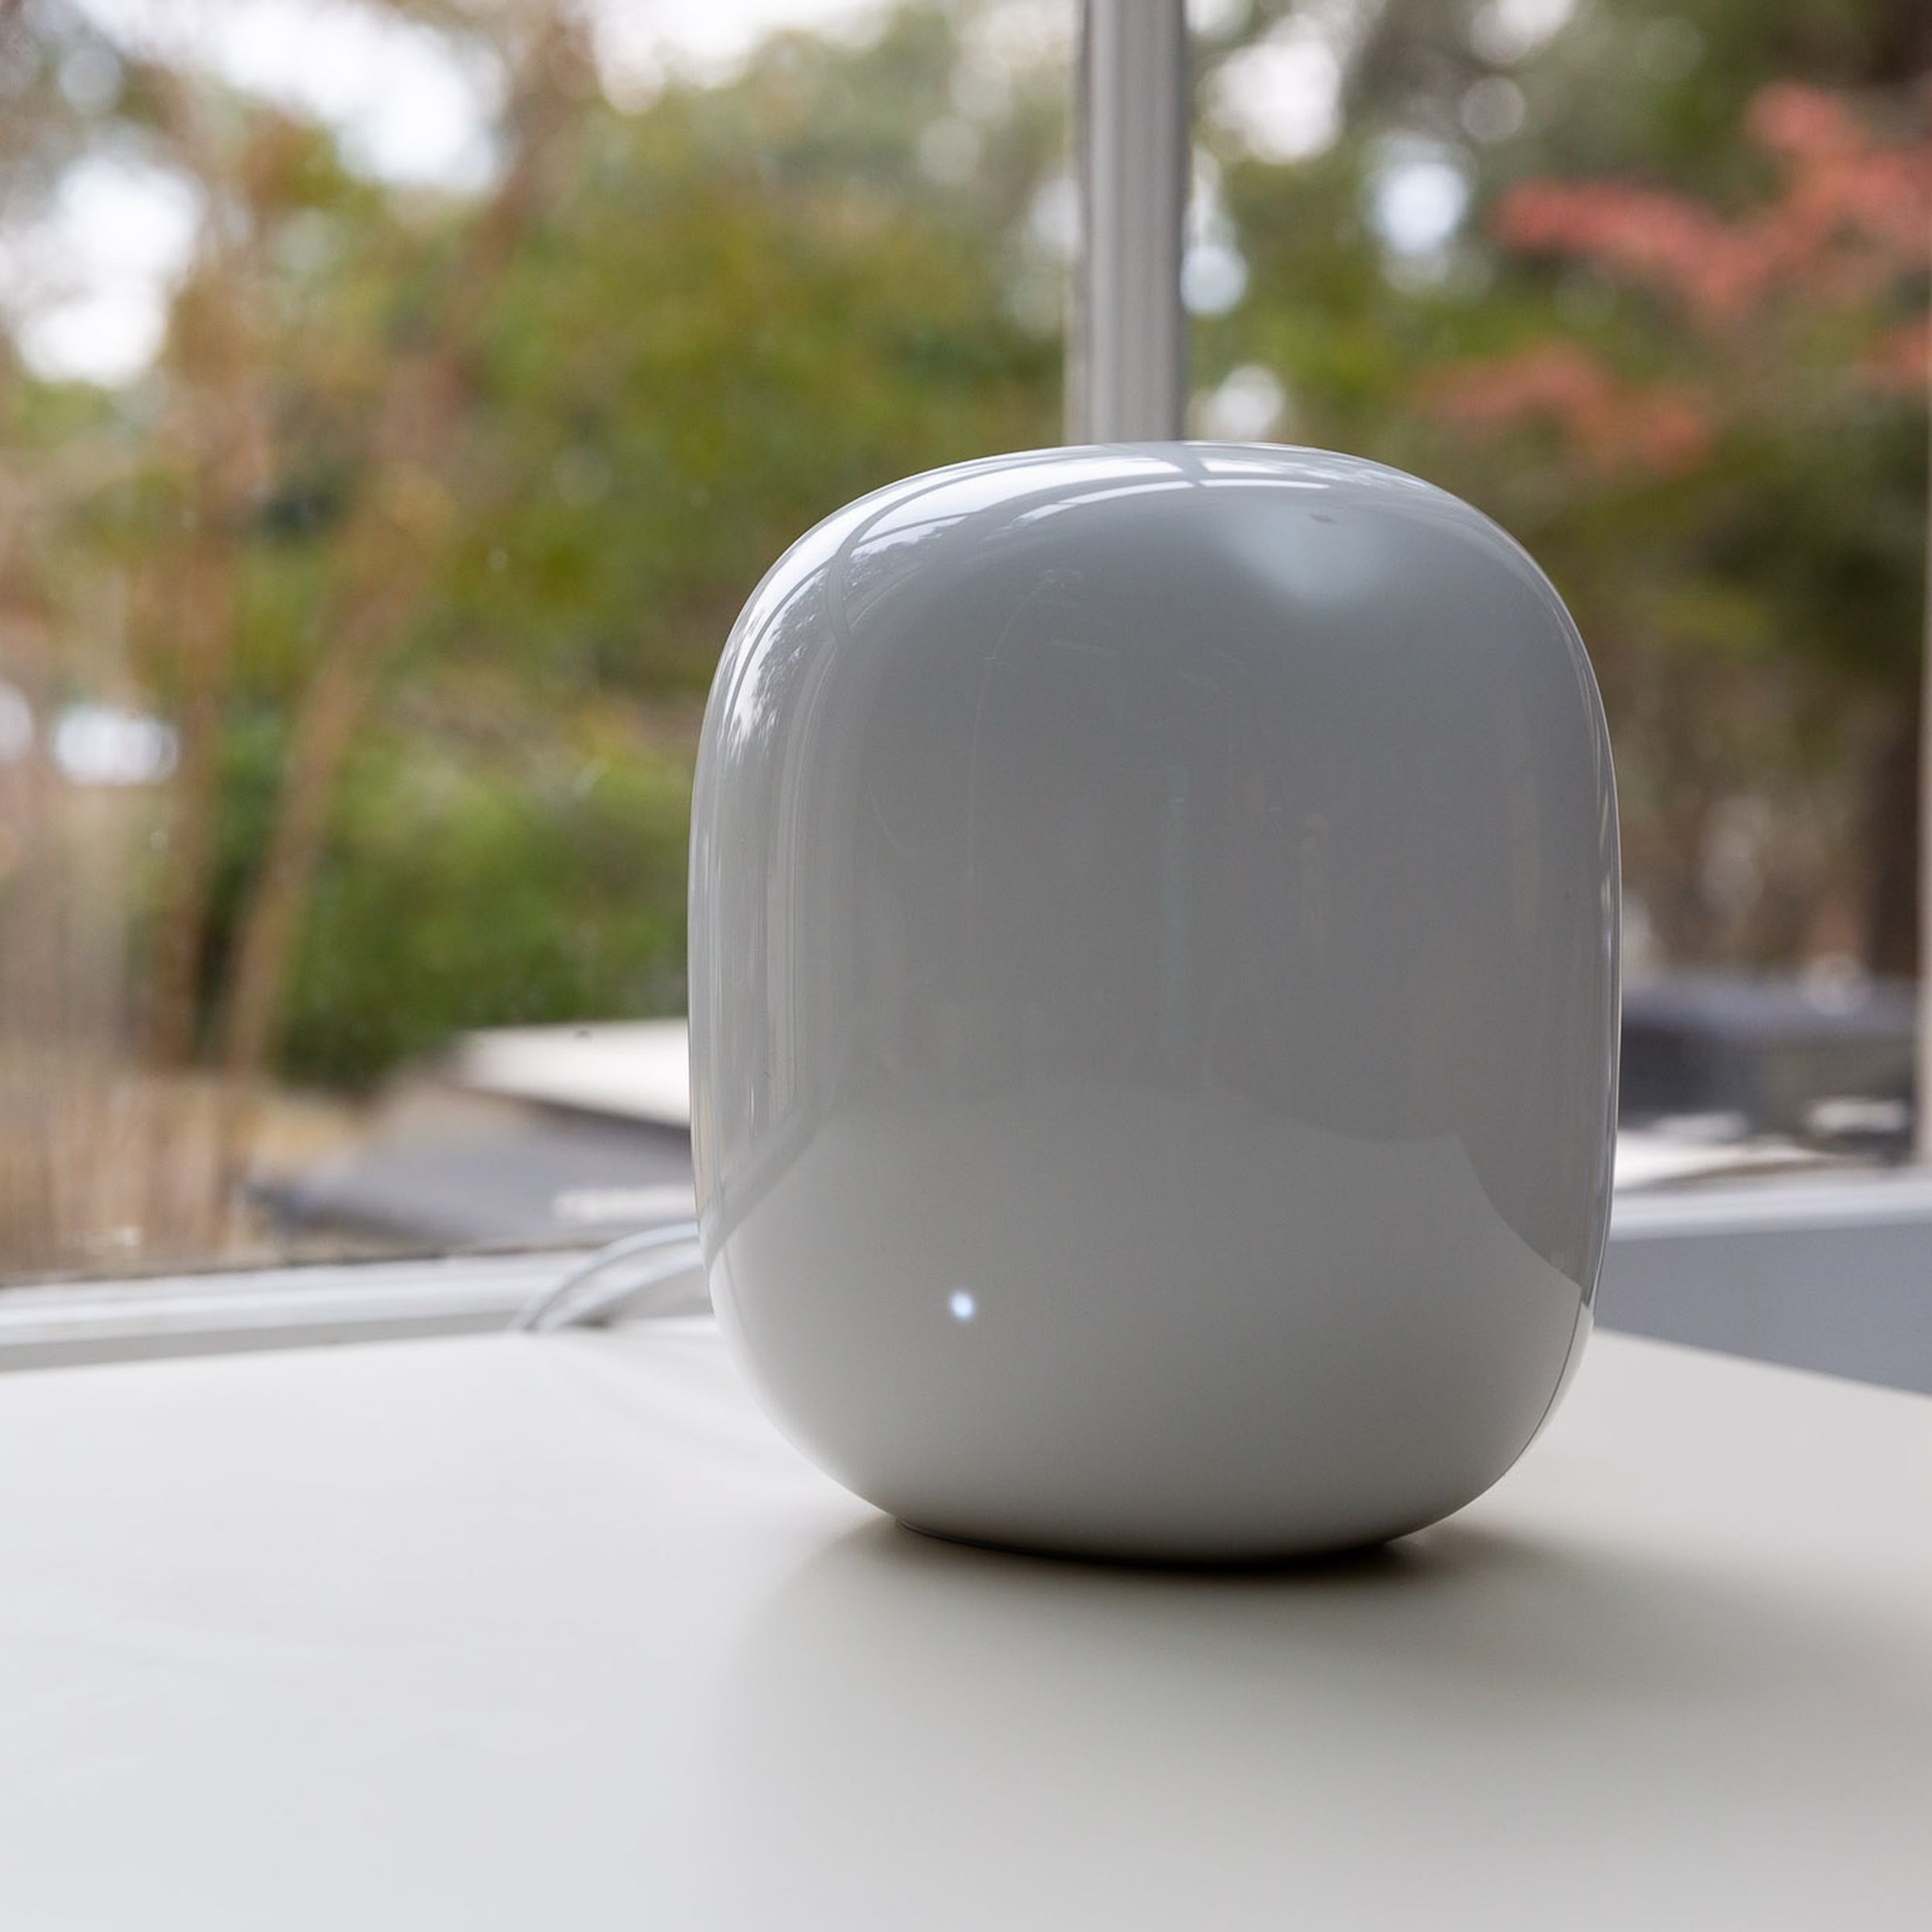 White Google Nest Wifi Pro router on a white table, in front of a window.